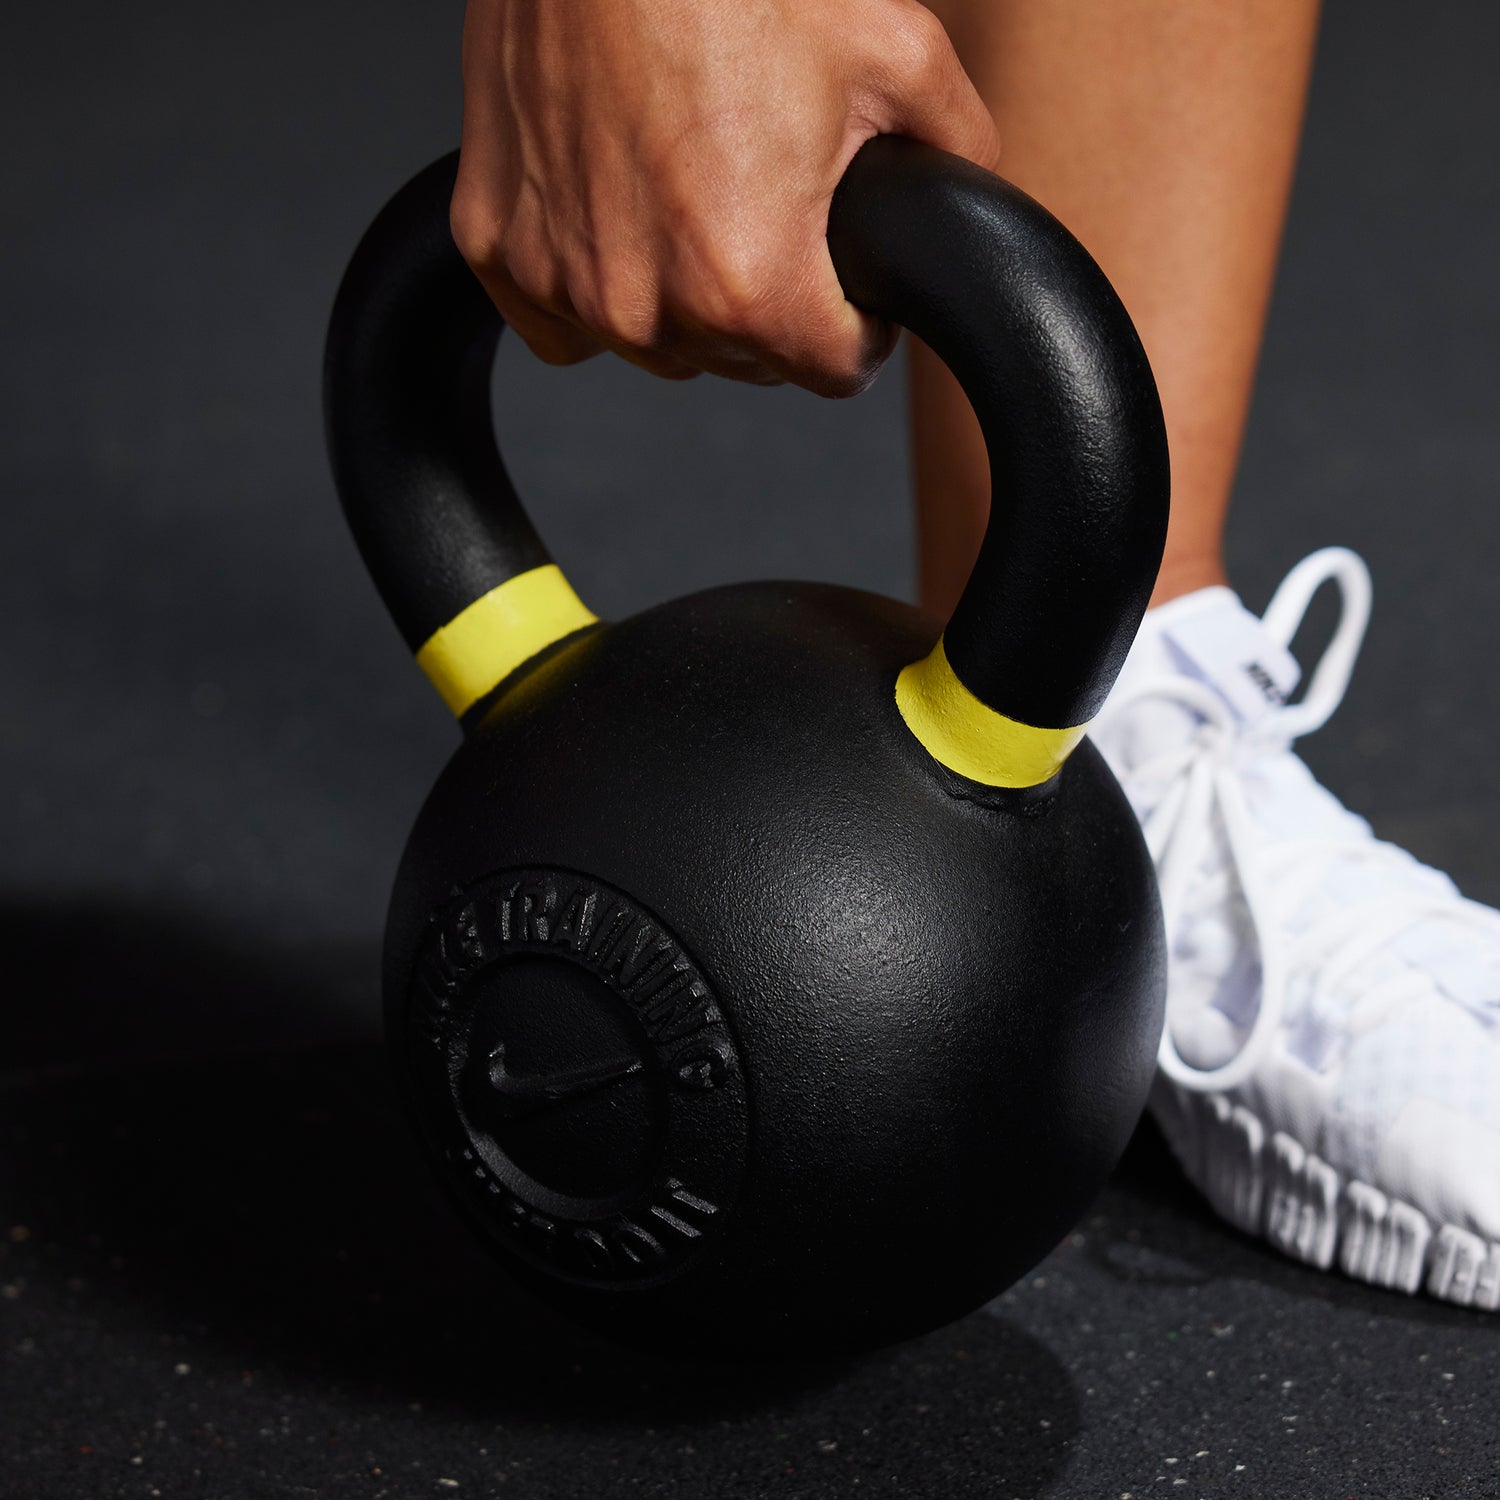 Athlete grabbing the handle for the Nike Kettlebell 35 LB